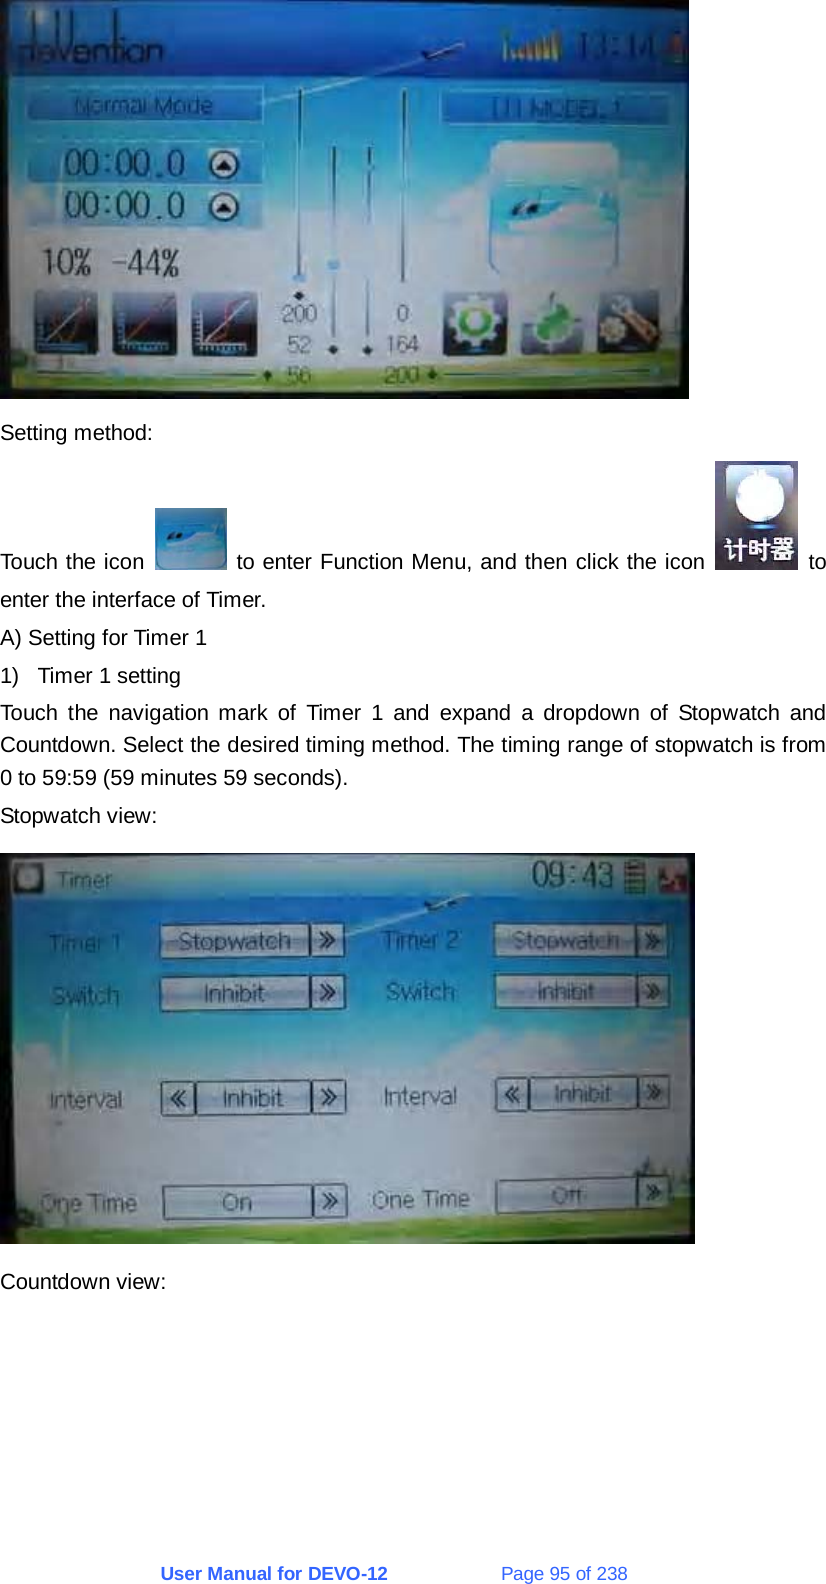 User Manual for DEVO-12             Page 95 of 238  Setting method: Touch the icon   to enter Function Menu, and then click the icon   to enter the interface of Timer. A) Setting for Timer 1 1)  Timer 1 setting Touch the navigation mark of Timer 1 and expand a dropdown of Stopwatch and Countdown. Select the desired timing method. The timing range of stopwatch is from 0 to 59:59 (59 minutes 59 seconds). Stopwatch view:  Countdown view: 